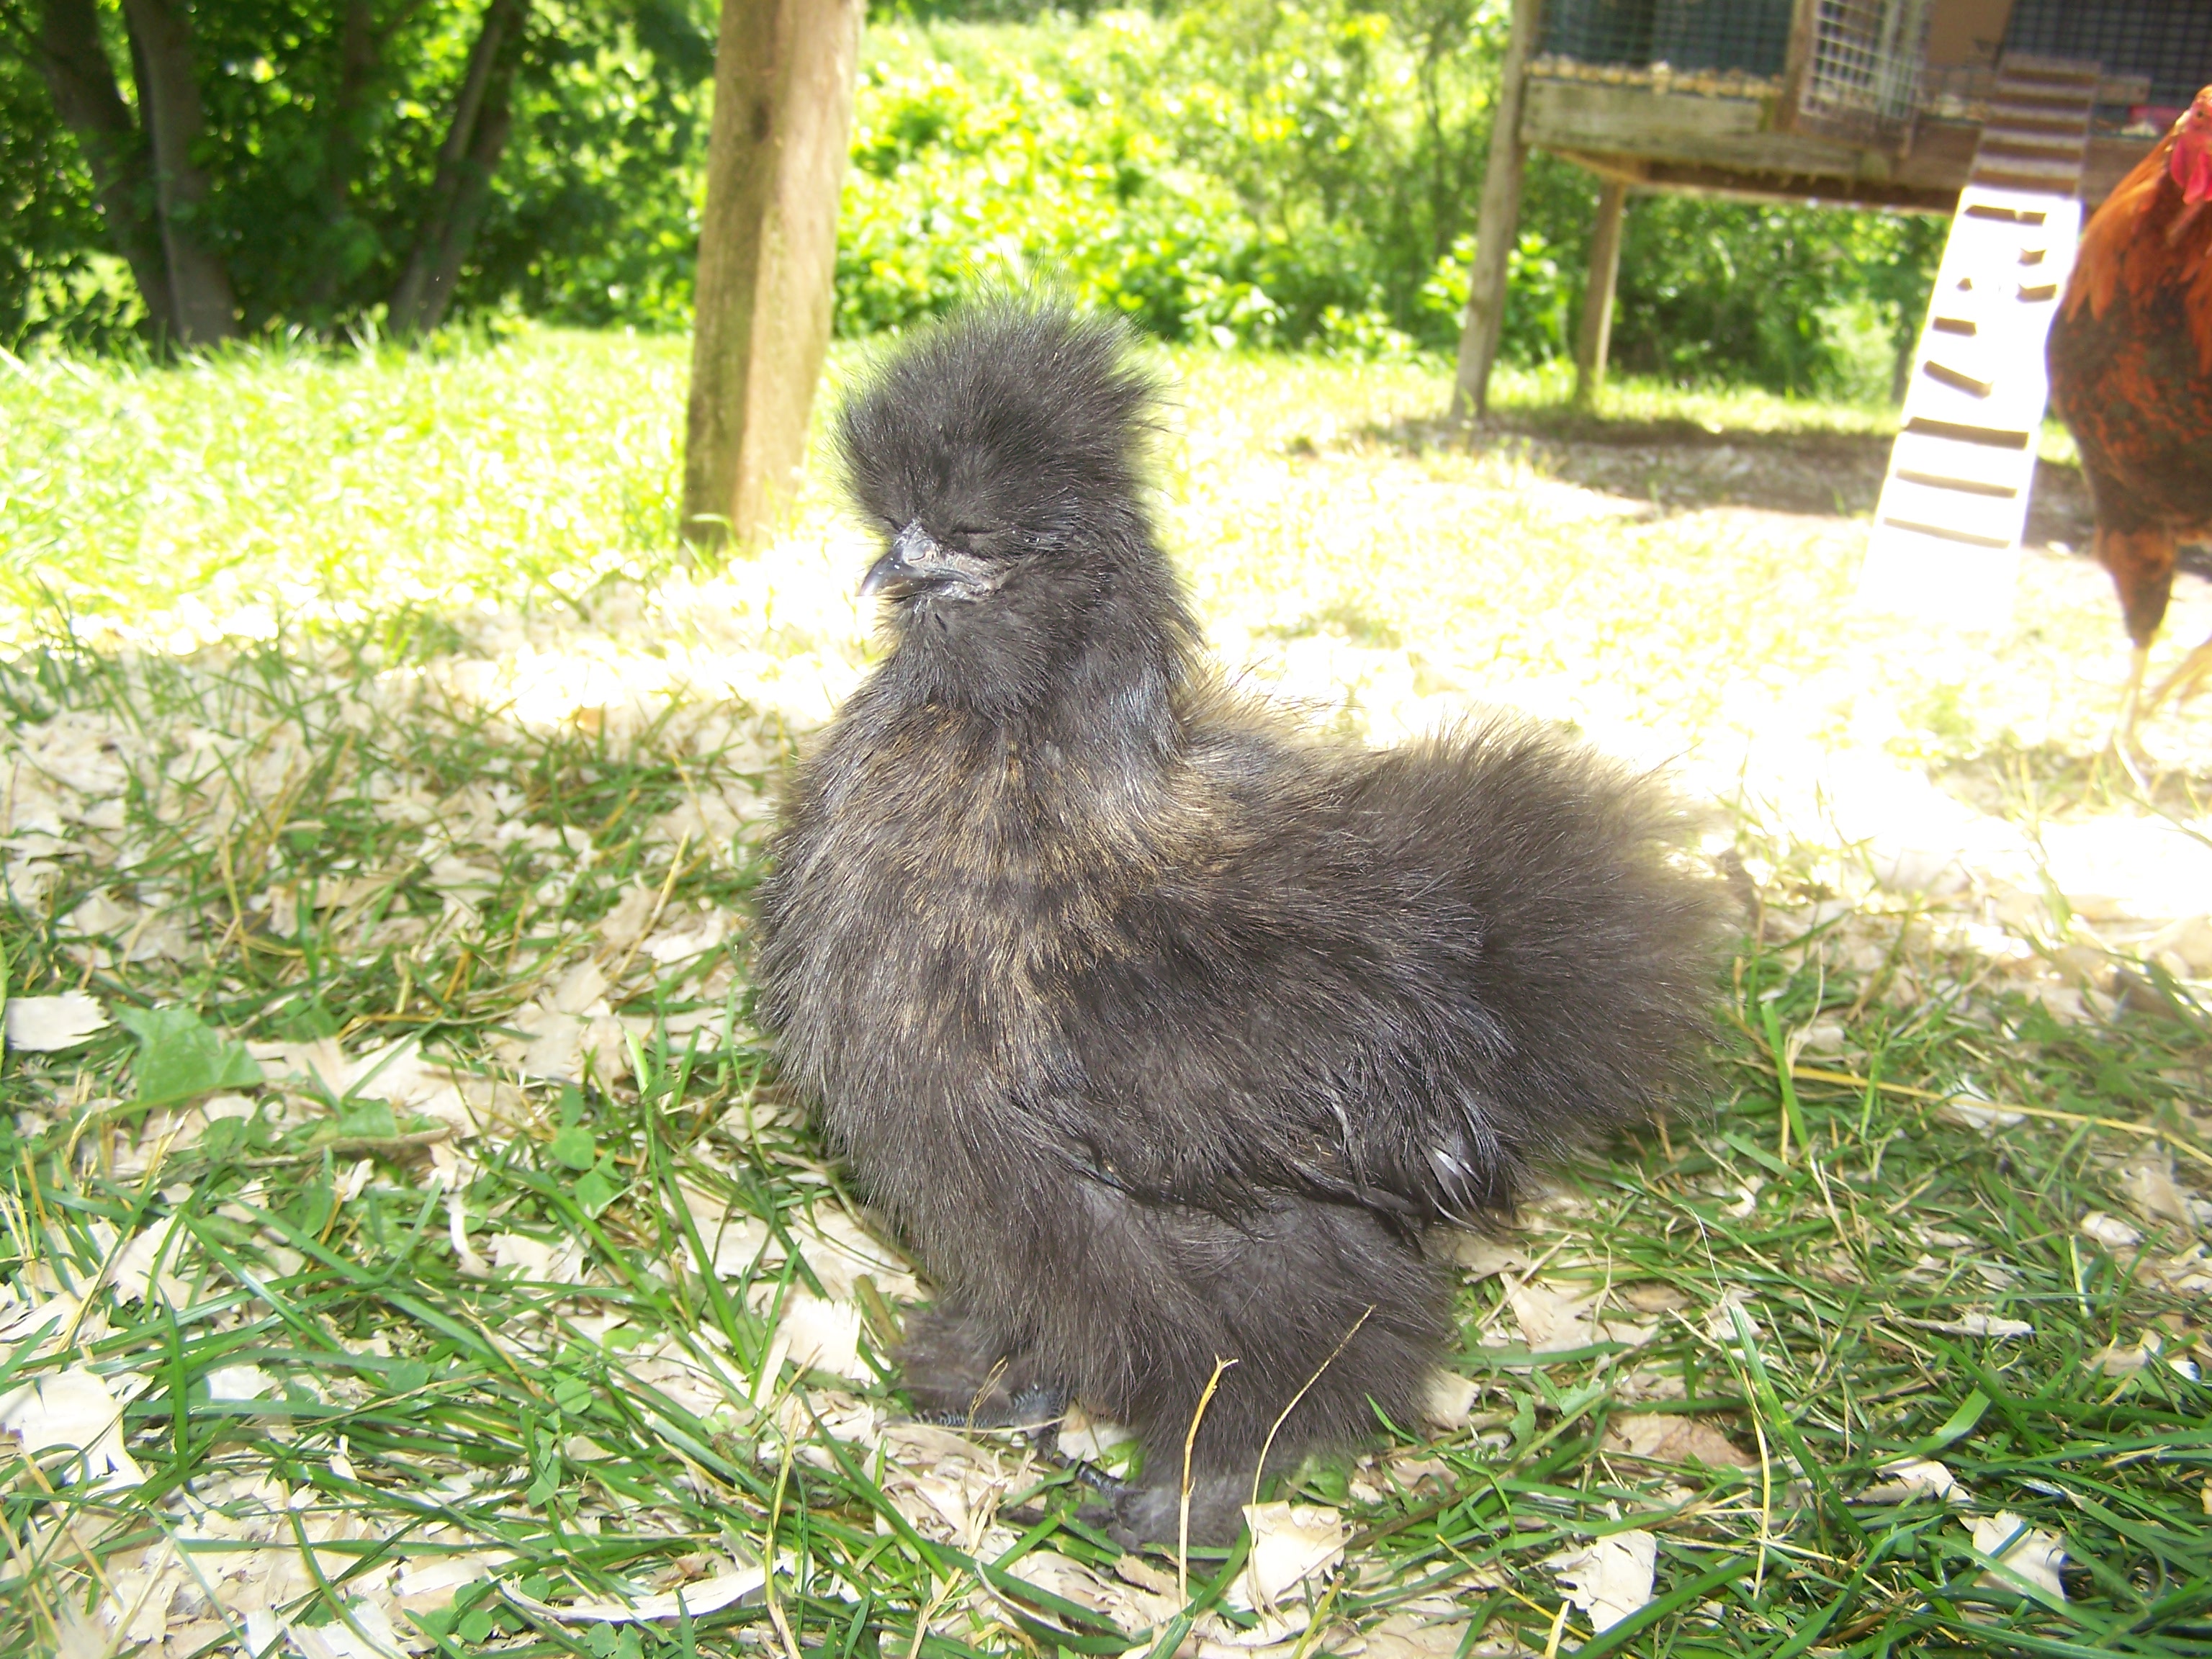 here is my little black silkie pullet i will send another only can send one at once